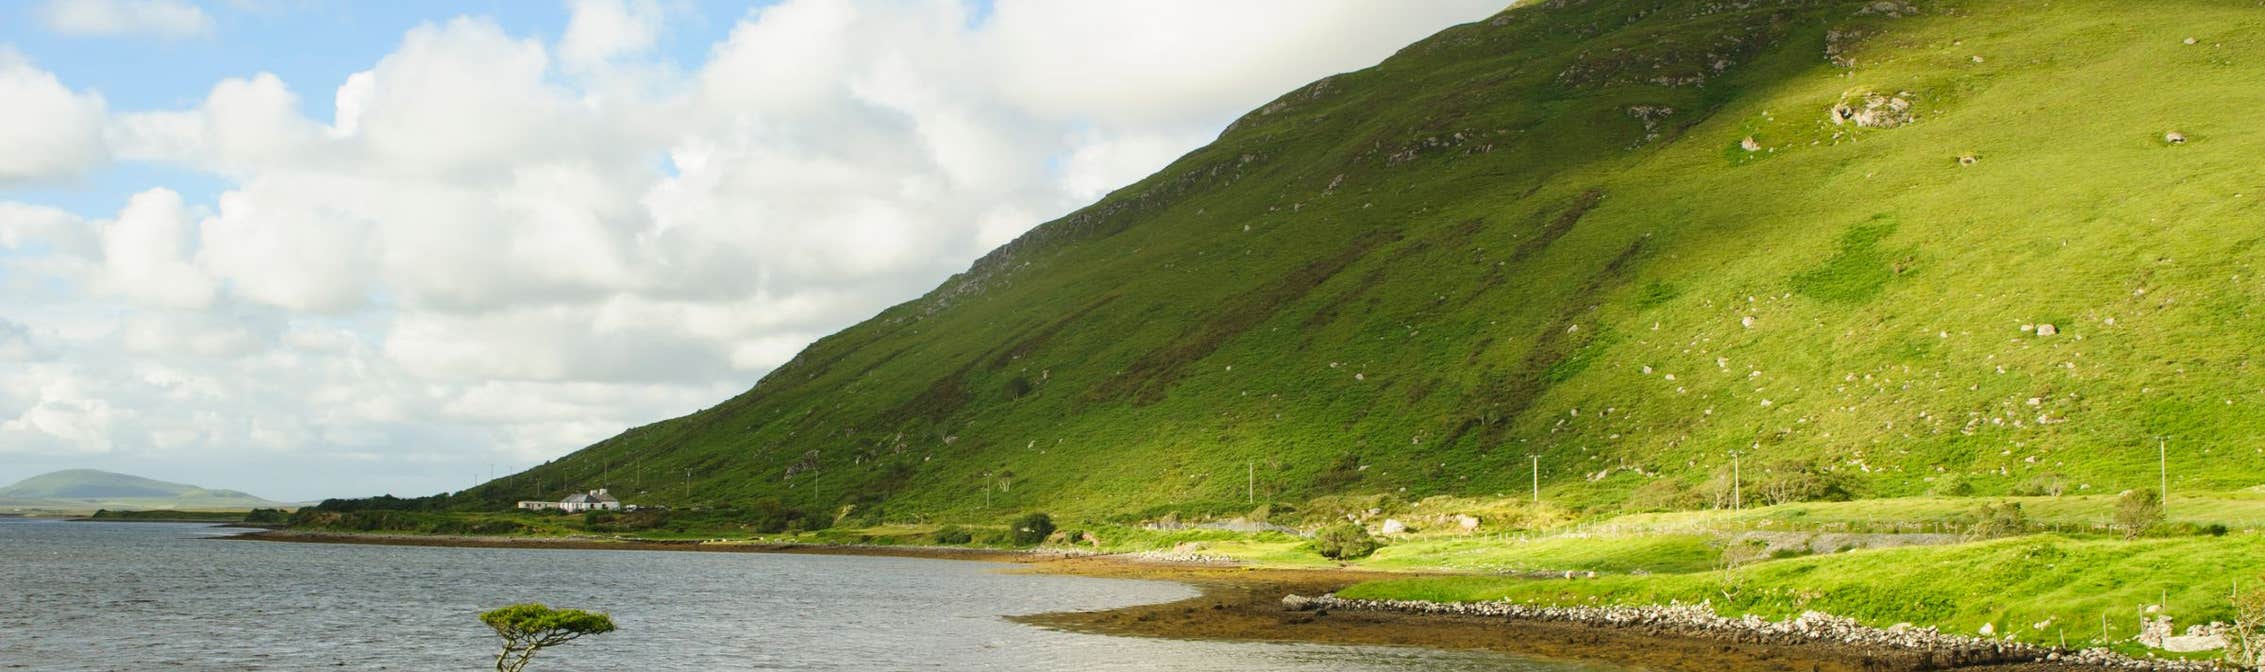 Image of Mulranny in County Mayo